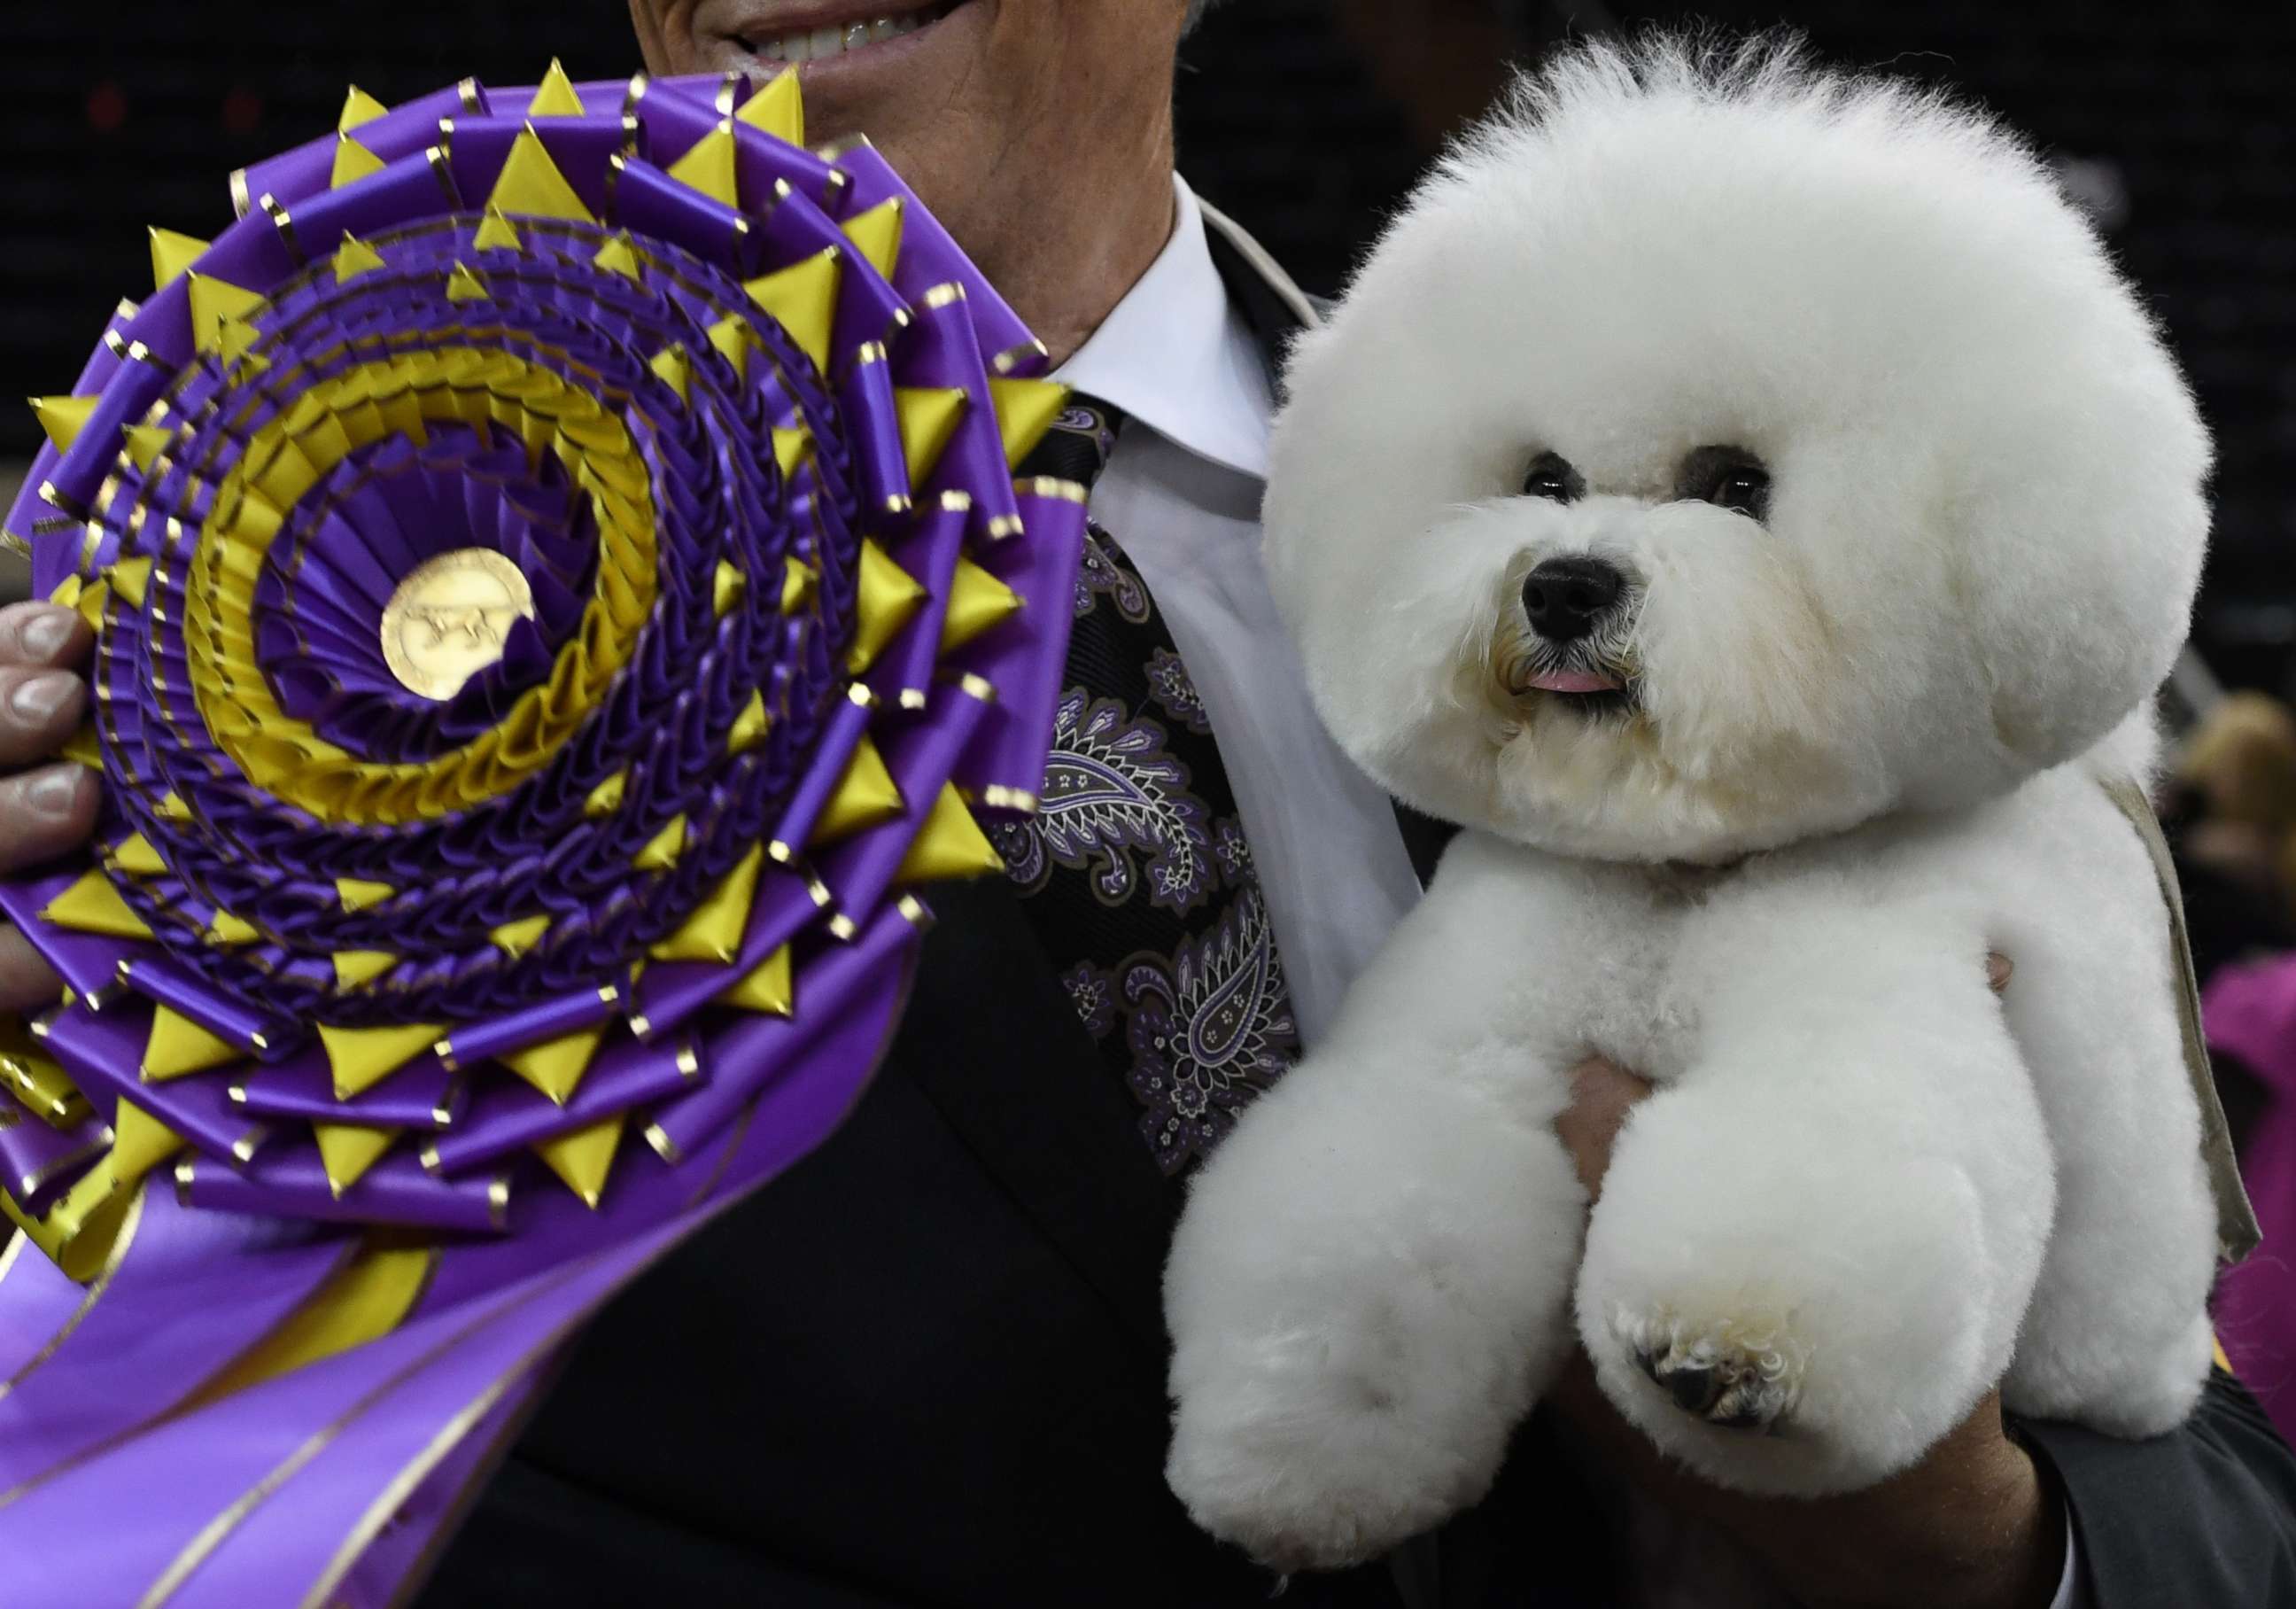 PHOTO: Flynn, the Bichon Frise, with handler Bill McFadden, poses after winning Best in Show at the Westminster Kennel Club 142nd Annual Dog Show in Madison Square Garden, Feb. 13, 2018, in New York City.